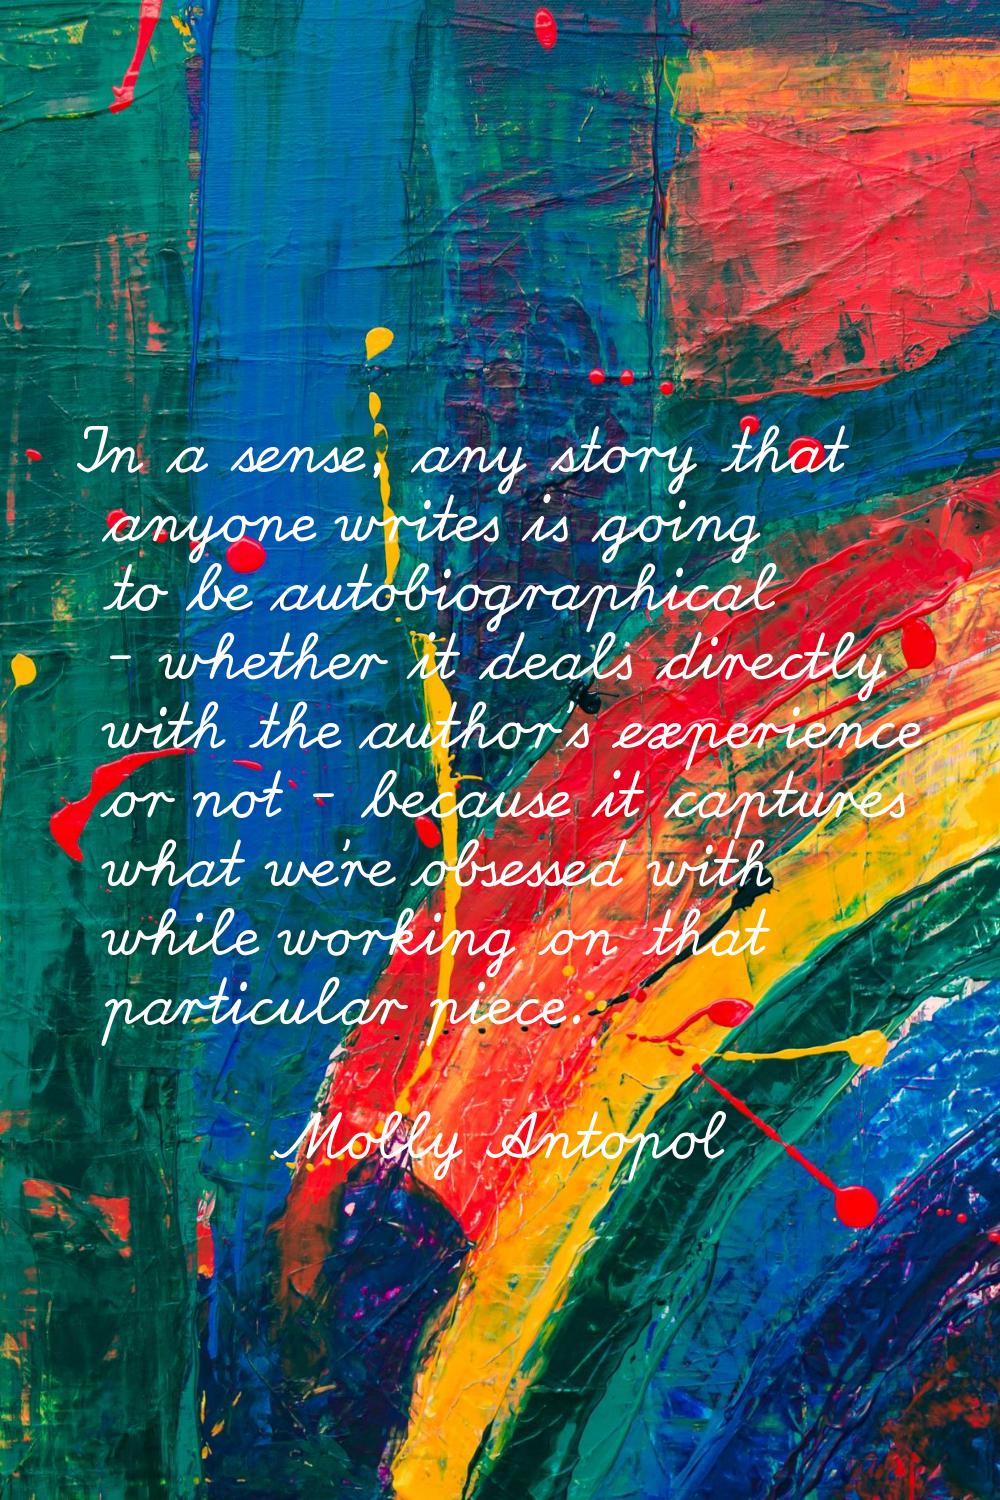 In a sense, any story that anyone writes is going to be autobiographical - whether it deals directl